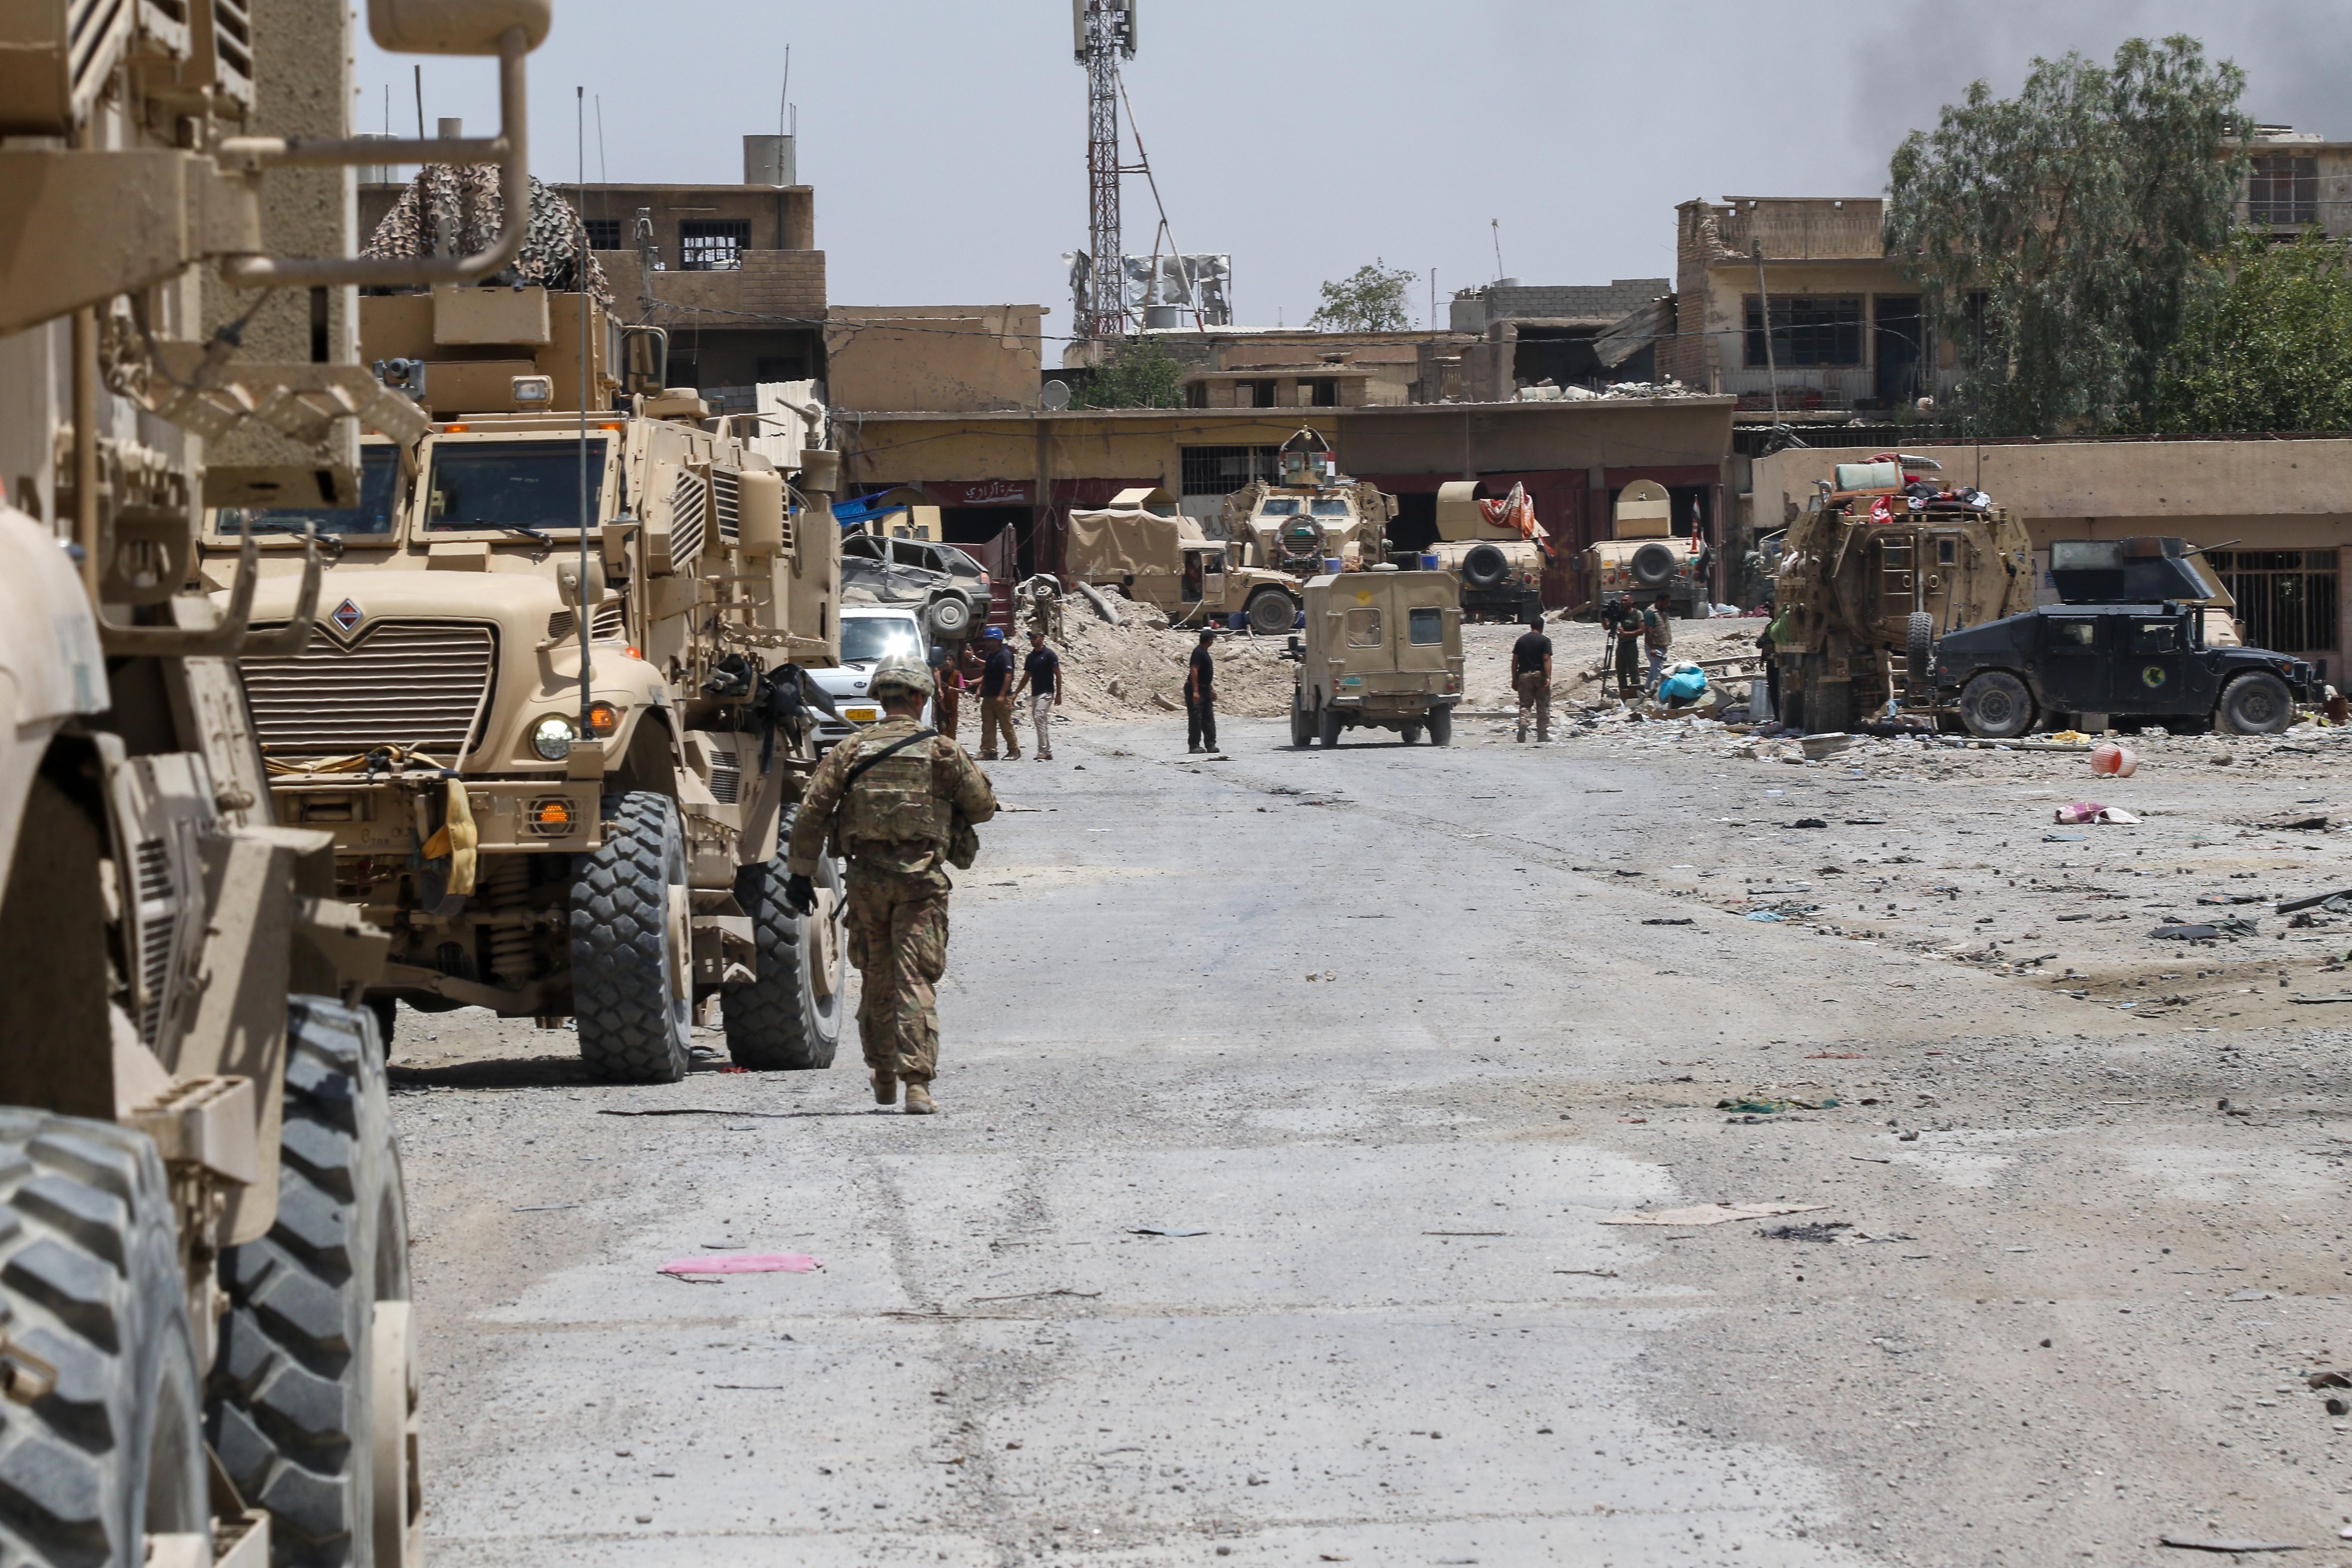 US soldiers assigned to the 2nd Brigade Combat Team, 82nd Airborne Division in Mosul, Iraq